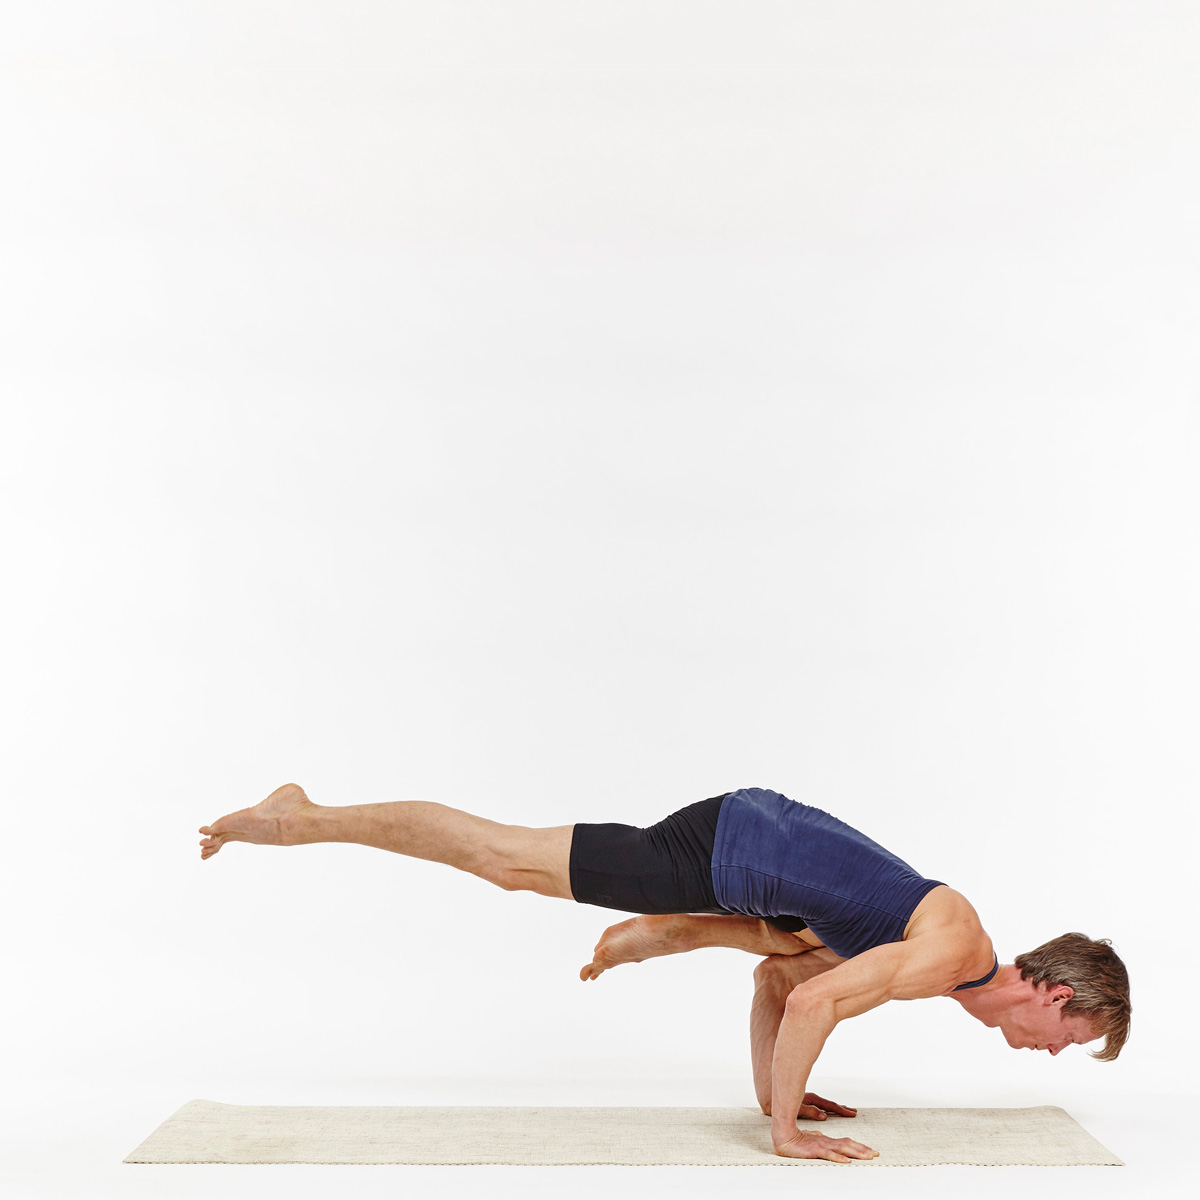 Yogasana to strengthen your arms and shoulder muscles